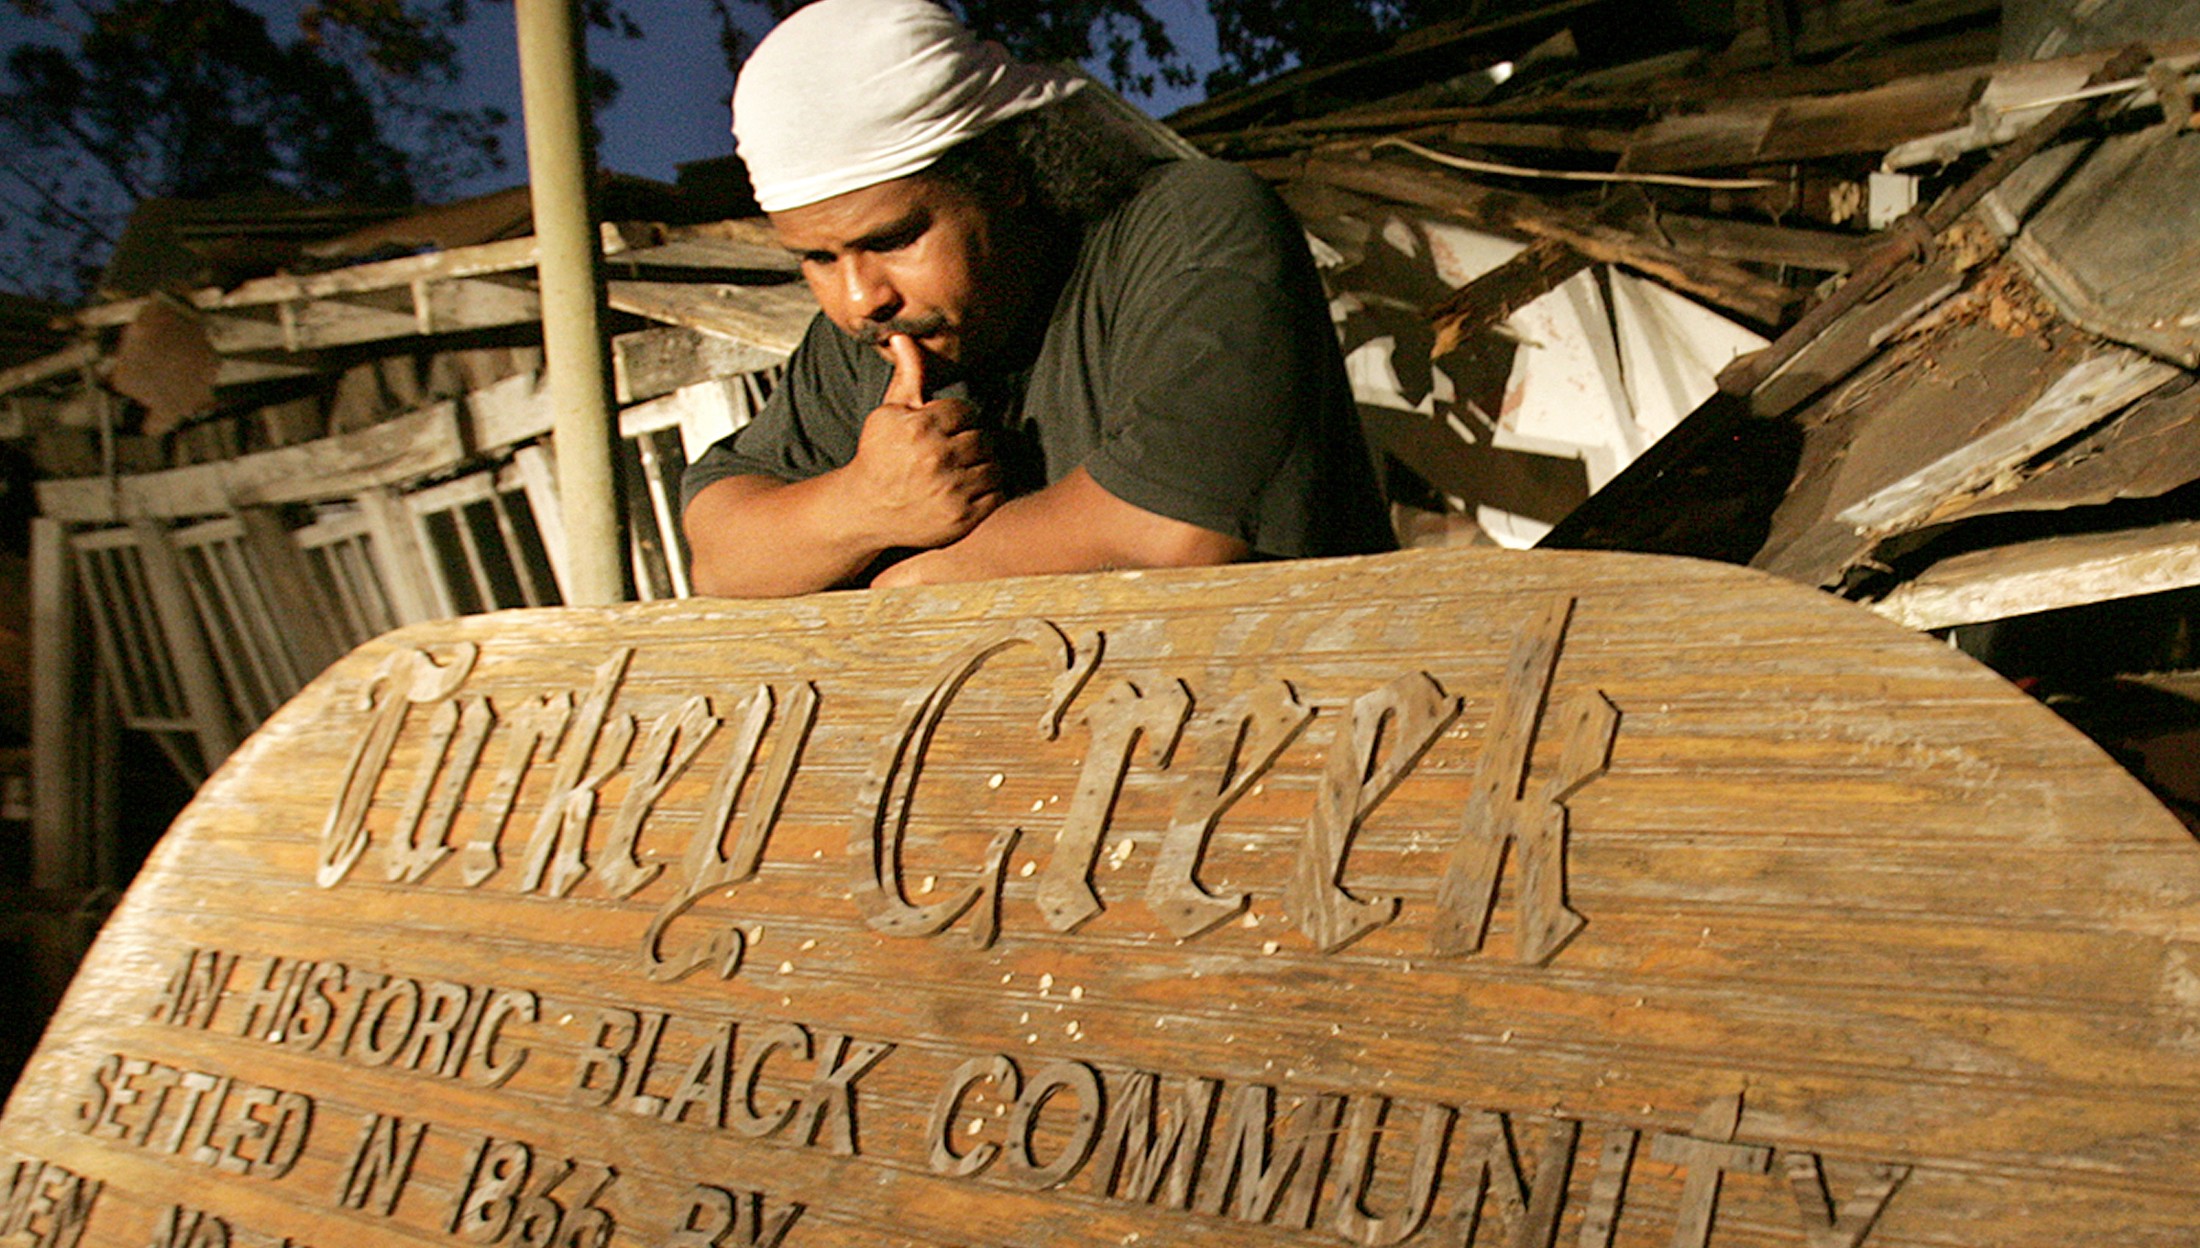 Derrick Evens with the Turkey Creek Historic Community Sign